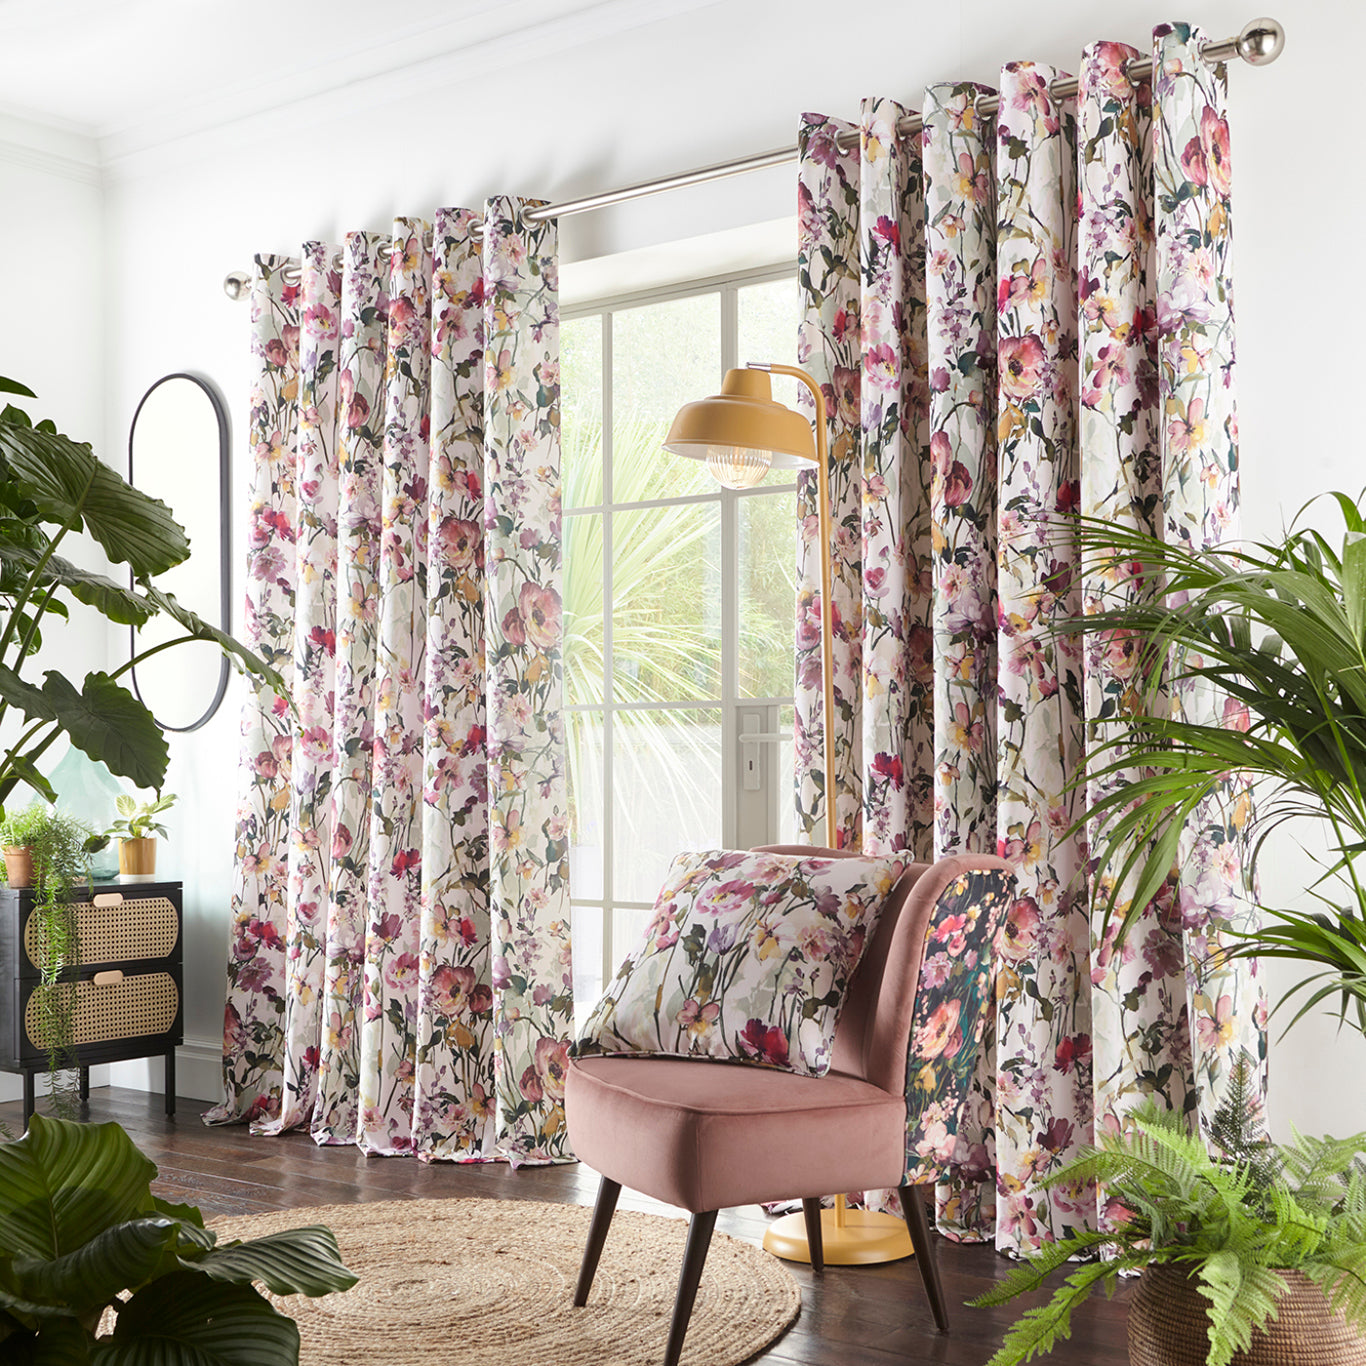 Meadow Antique Eyelet Curtains by Studio G